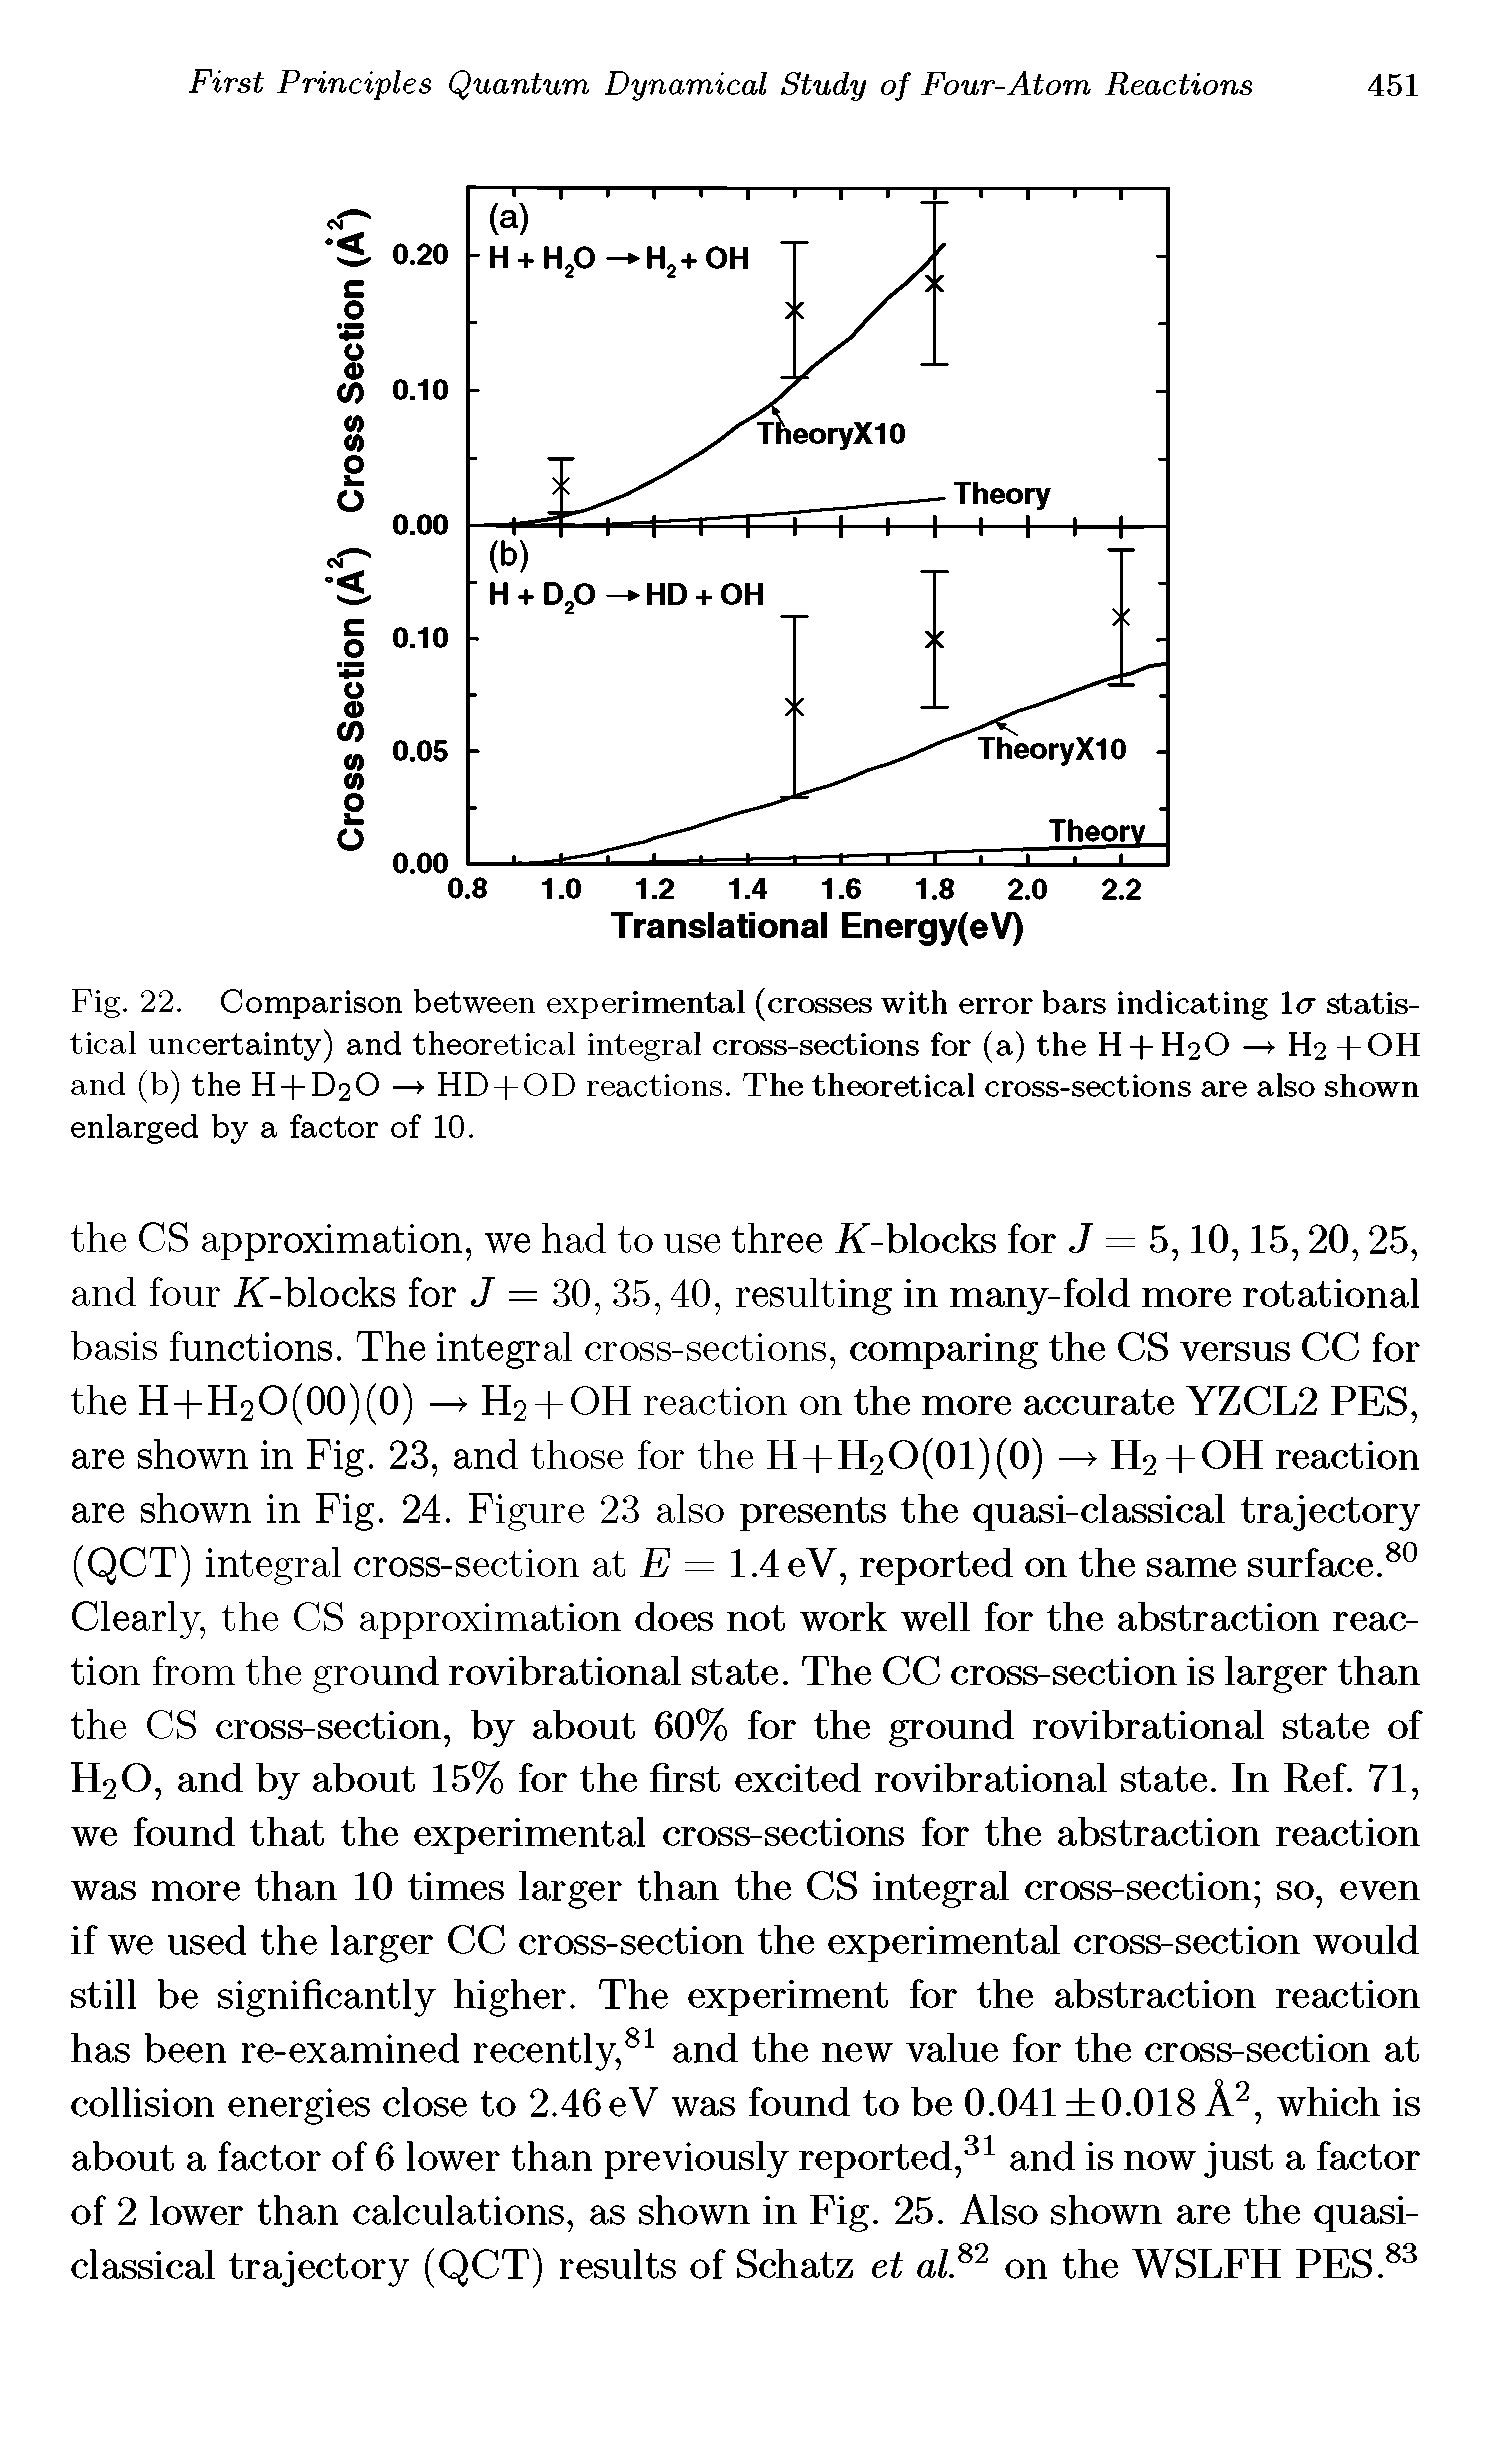 Fig. 22. Comparison between experimental (crosses with error bars indicating la statistical uncertainty) and theoretical integral cross-sections for (a) the H + H2O —> H2 +OH and (b) the H + D2O —> HD + OD reactions. The theoretical cross-sections are also shown enlarged by a factor of 10.